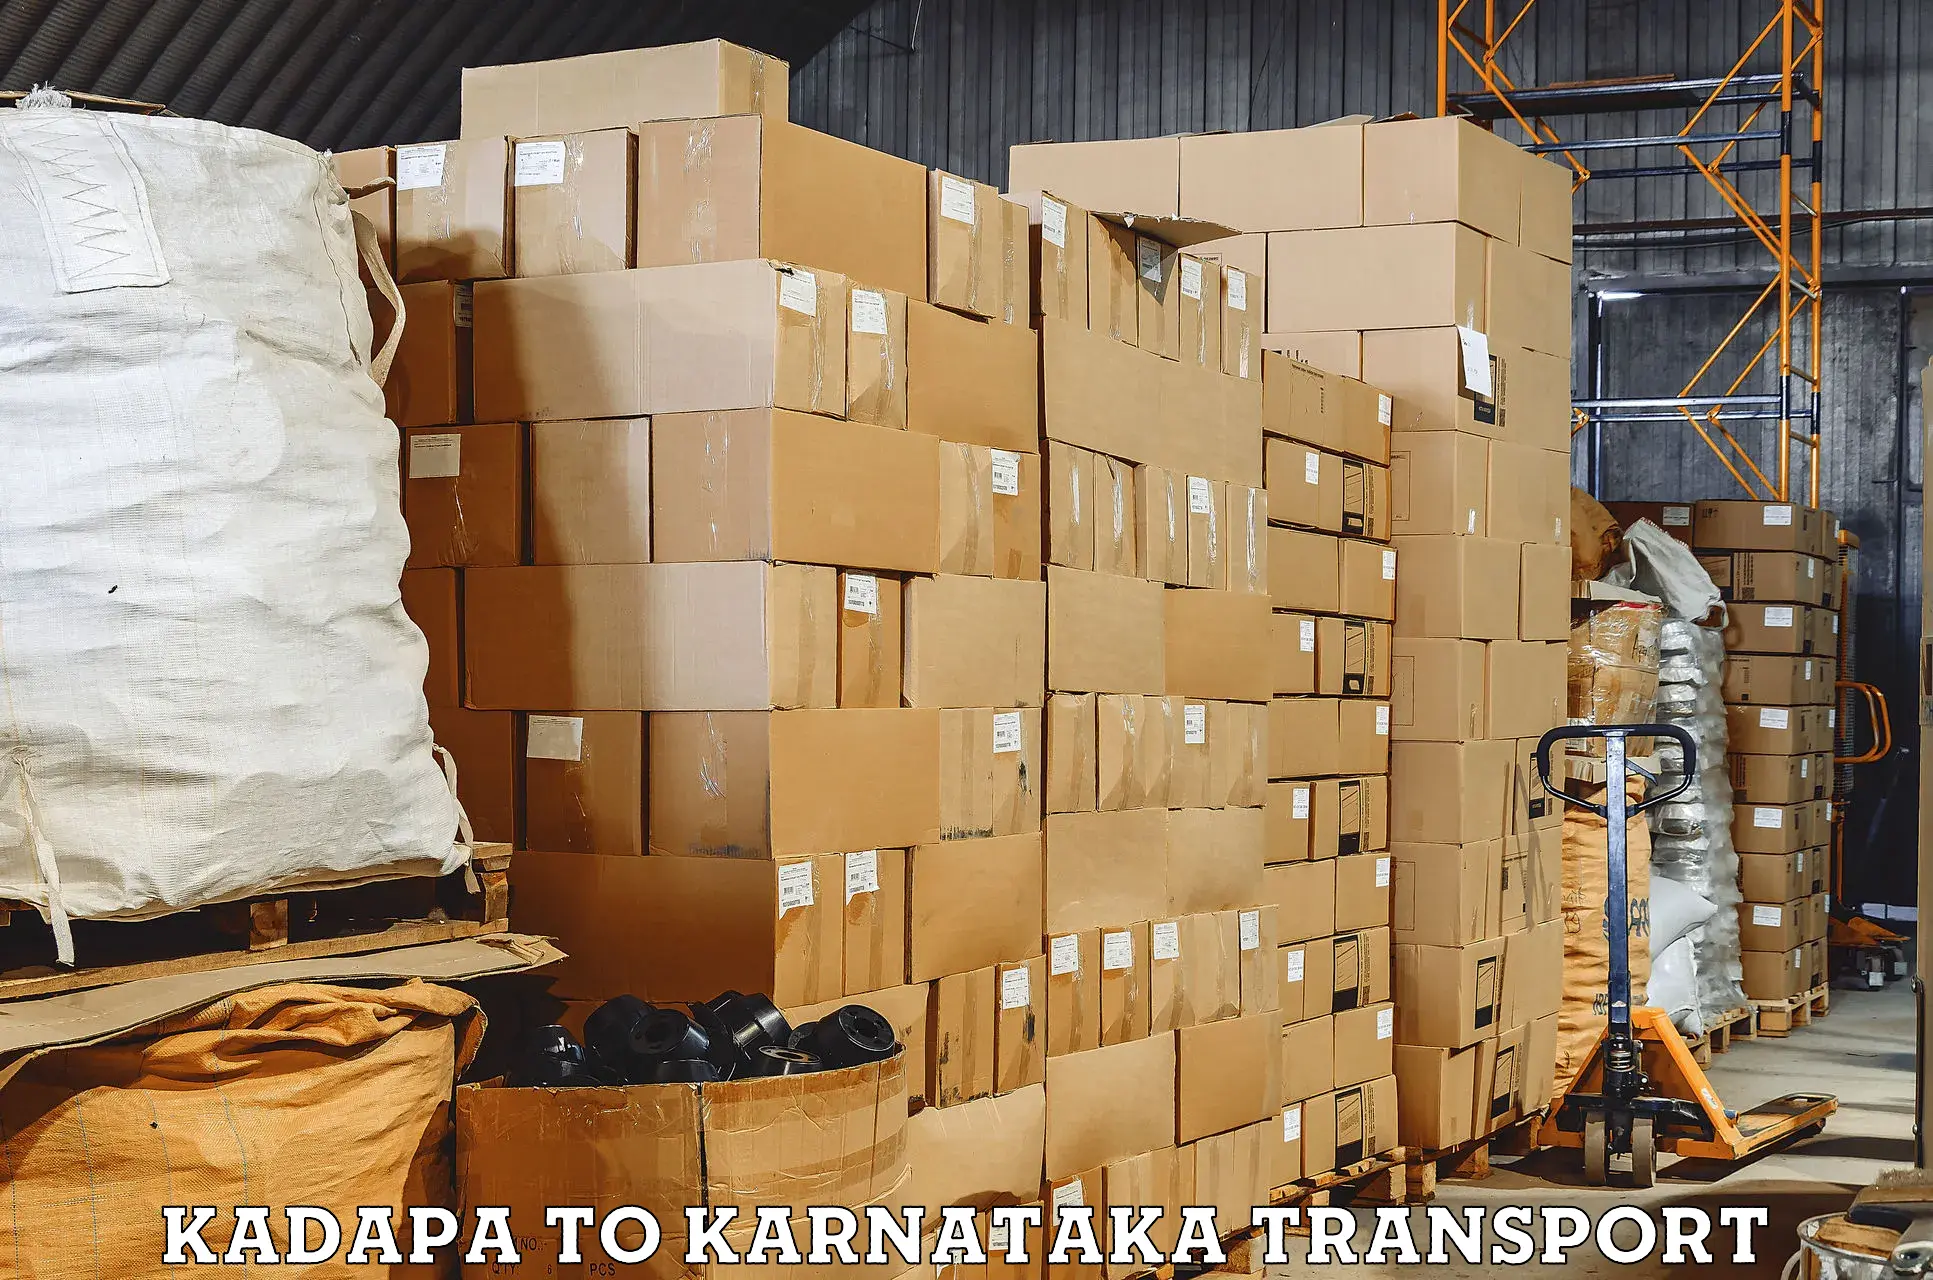 Transport bike from one state to another Kadapa to Ranebennur